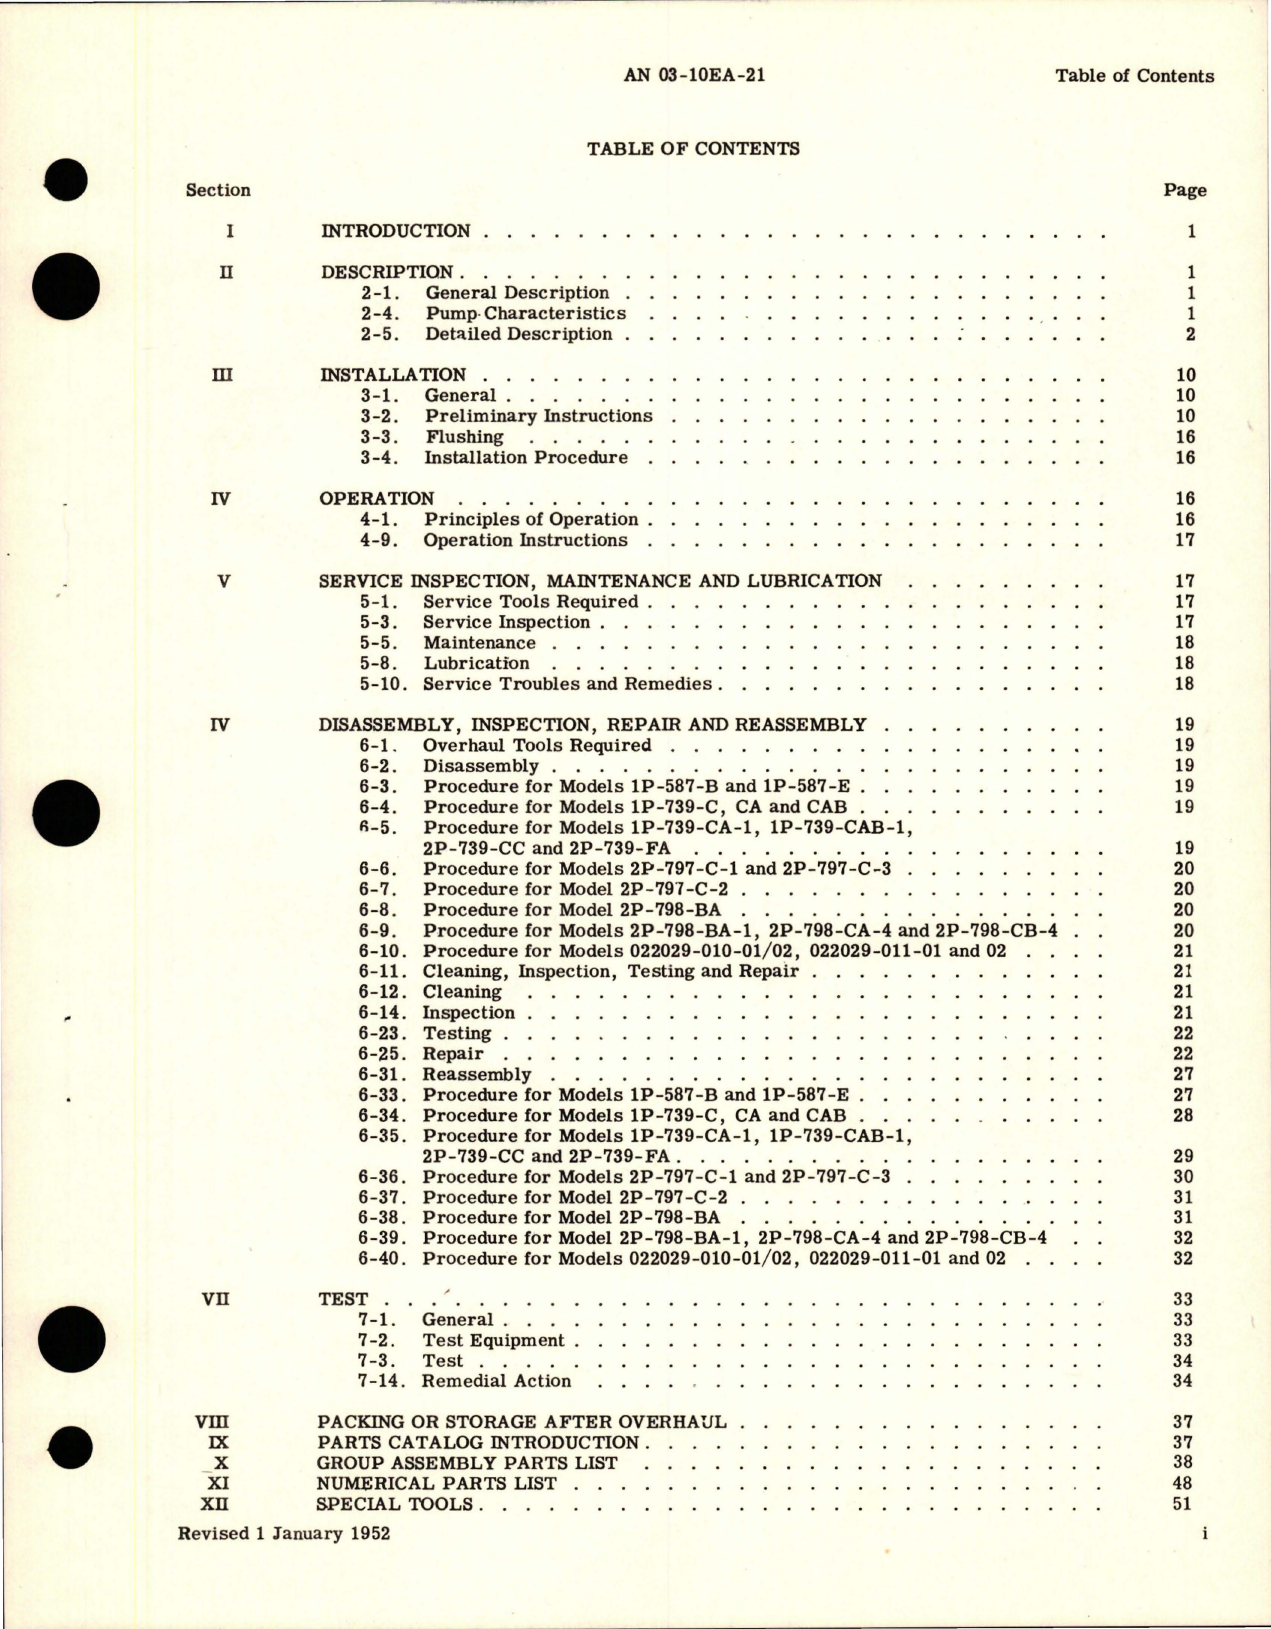 Sample page 5 from AirCorps Library document: Operation, Service and Overhaul Instructions with Parts for Engine Driven Gear Type High Pressure Fuel Pumps